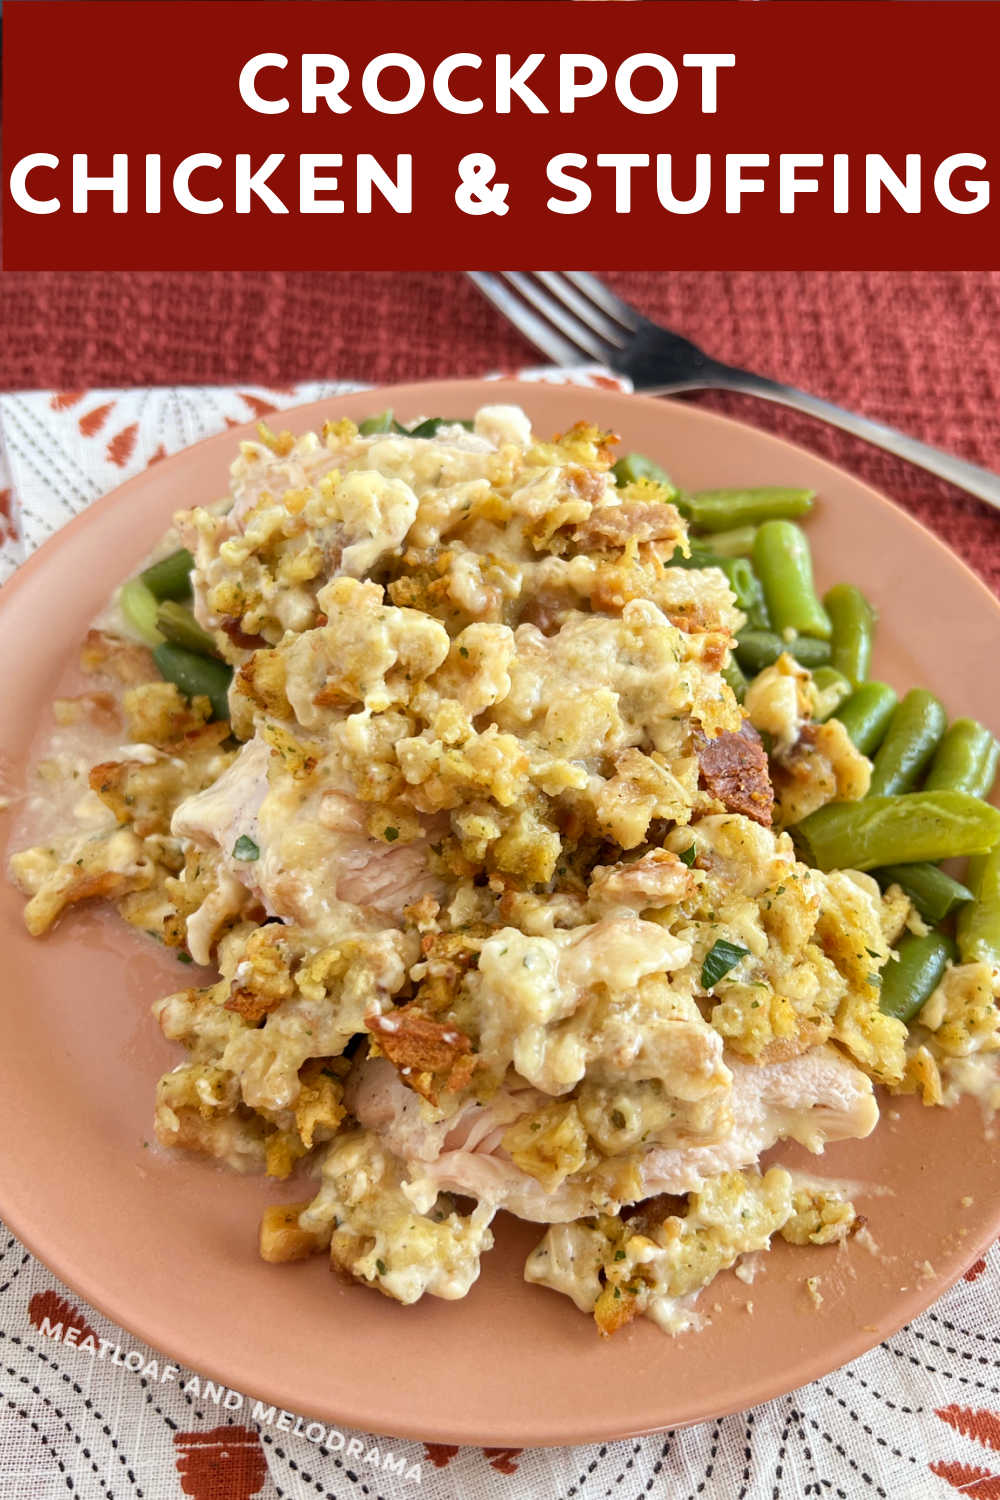 CrockPot Chicken and Stuffing is an easy slow cooker chicken recipe made with simple ingredients. An easy recipe and delicious dinner the whole family loves and a great idea for an alternative Thanksgiving dinner! via @meamel